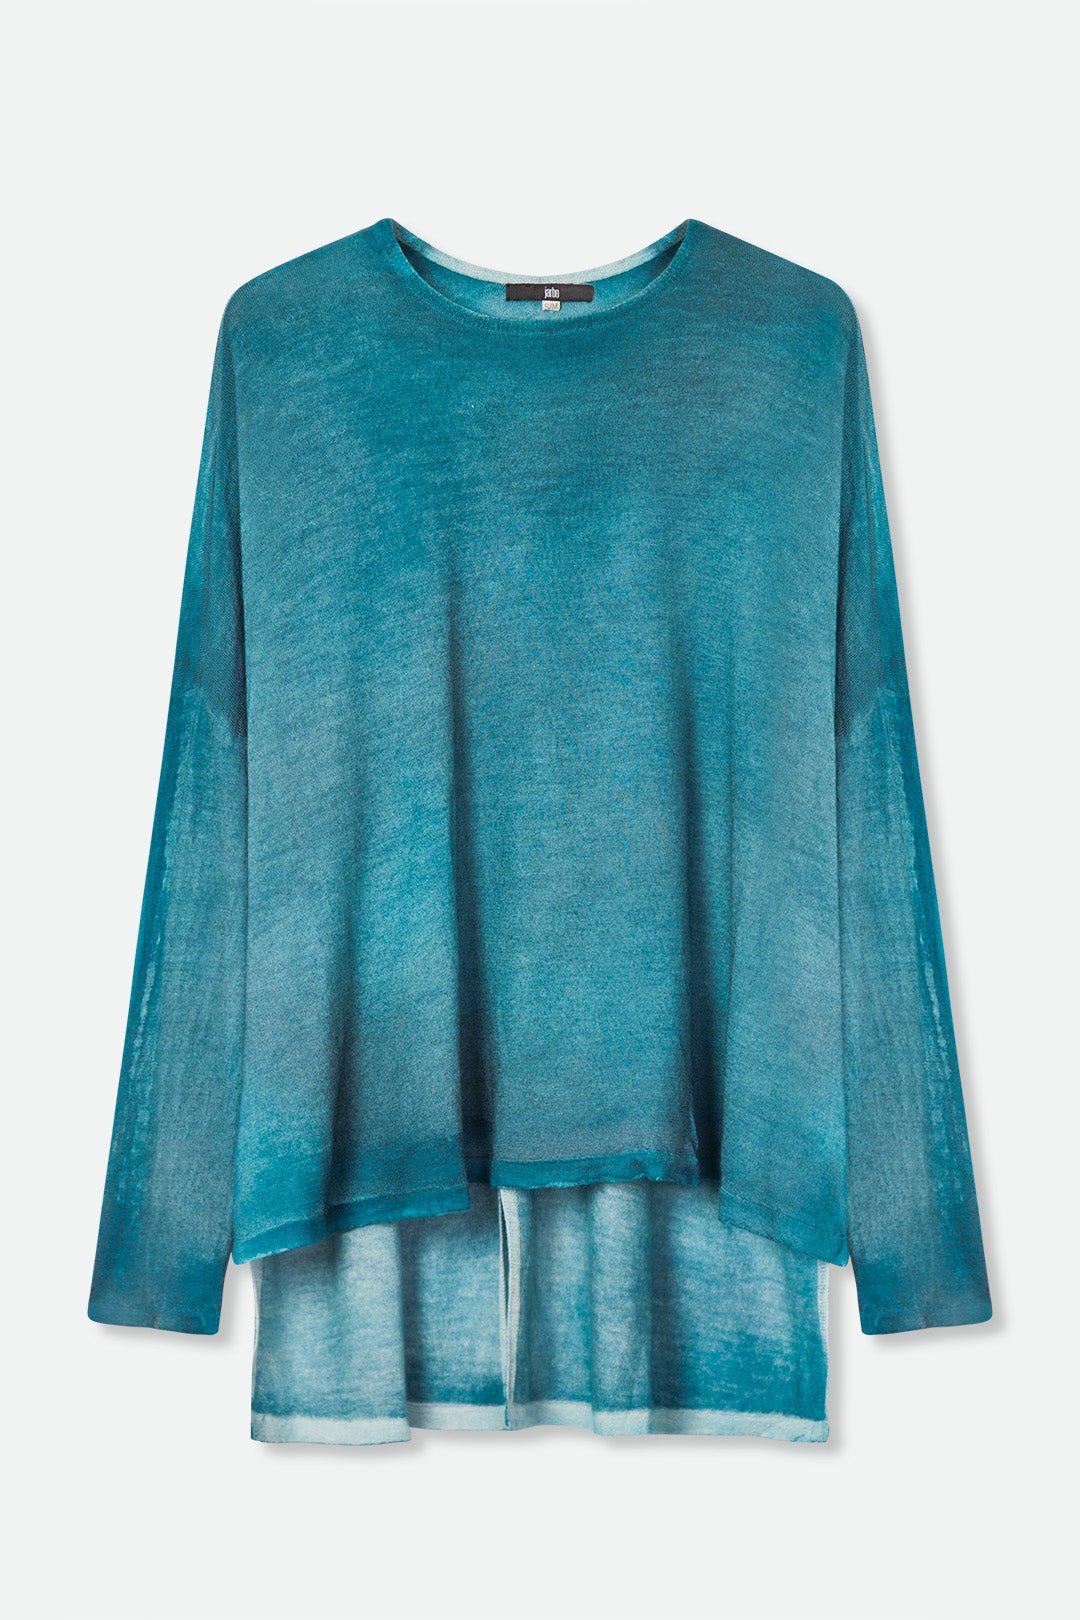 SALA CREW HIGH LOW IN HAND-DYED CASHMERE OCEAN BLUE - Jarbo